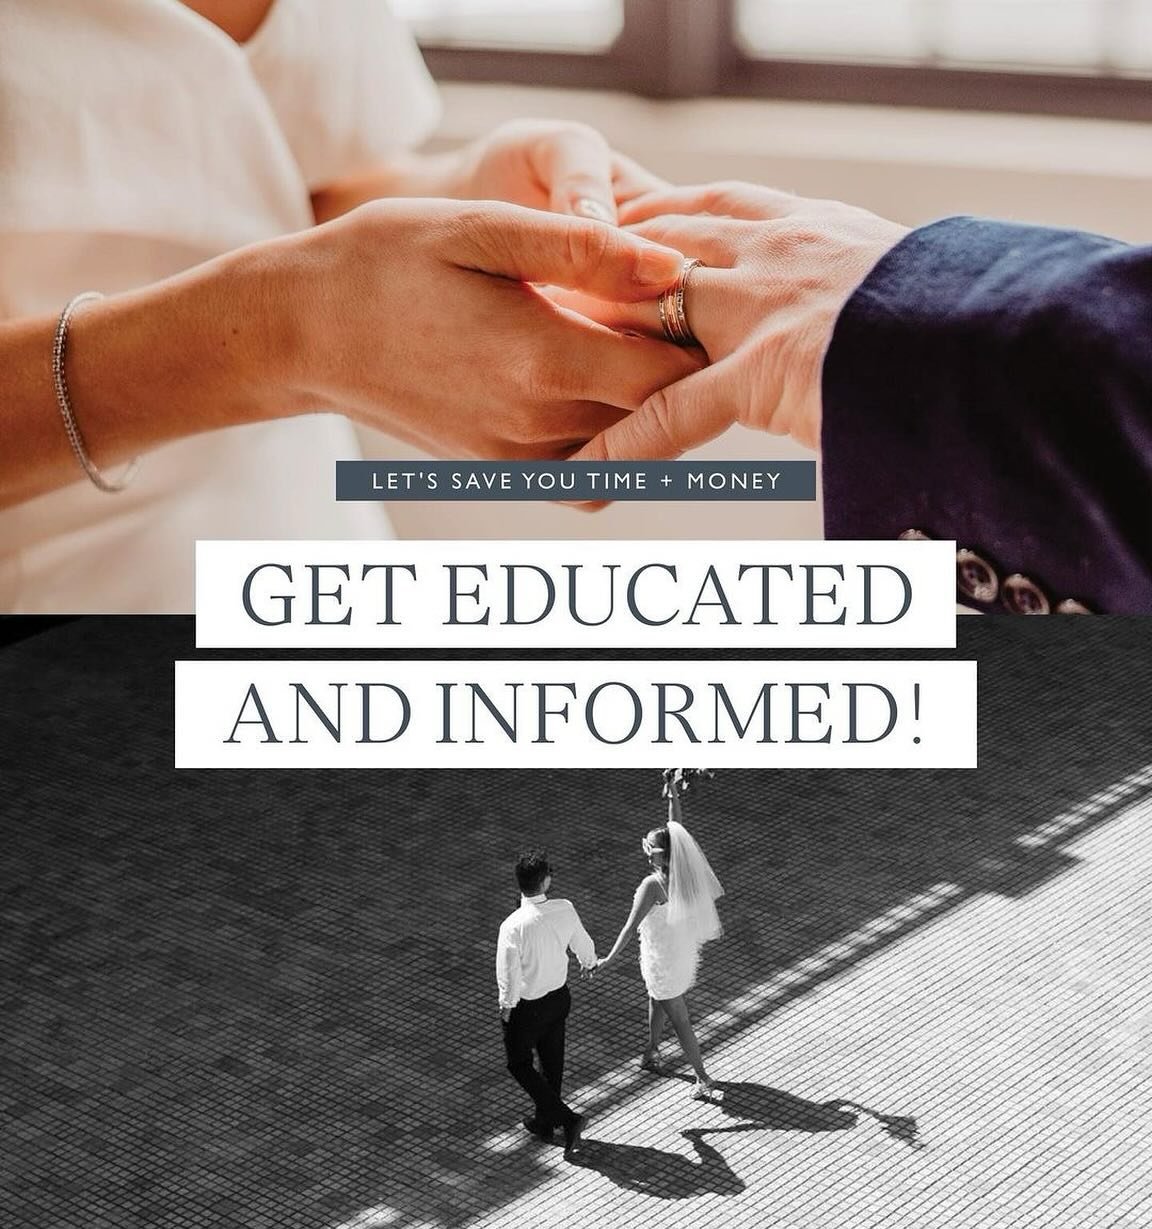 𝘓𝘦𝘵𝘴 𝘚𝘈𝘝𝘌 𝘺𝘰𝘶 𝘛𝘐𝘔𝘌 𝘢𝘯𝘥 𝘔𝘖𝘕𝘌𝘠!

It&rsquo;s so important that you&rsquo;re educated and informed on every decision of your wedding. 

It&rsquo;s a large investment of time &amp; money so why would you not explore having a wedding